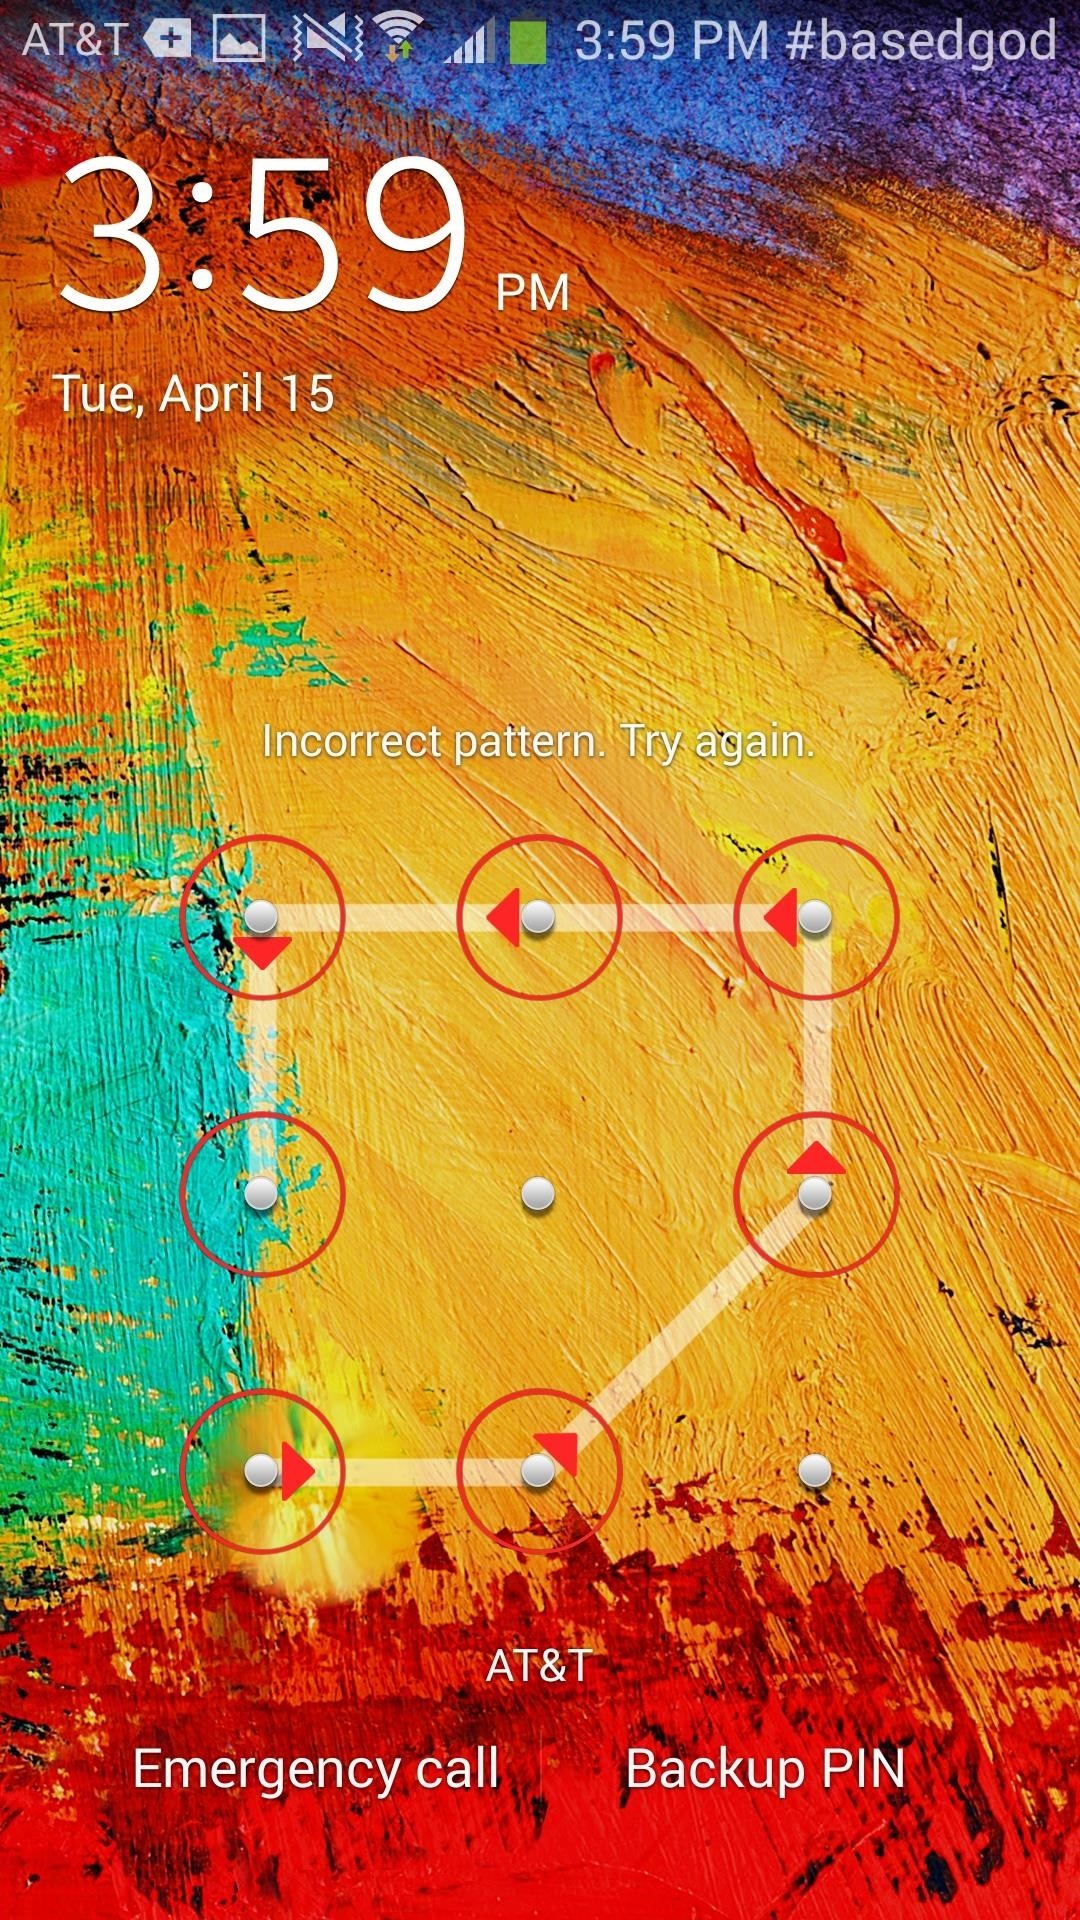 How to Get More Lock Screen Pattern Attempts Without Waiting on Your Samsung Galaxy Note 3